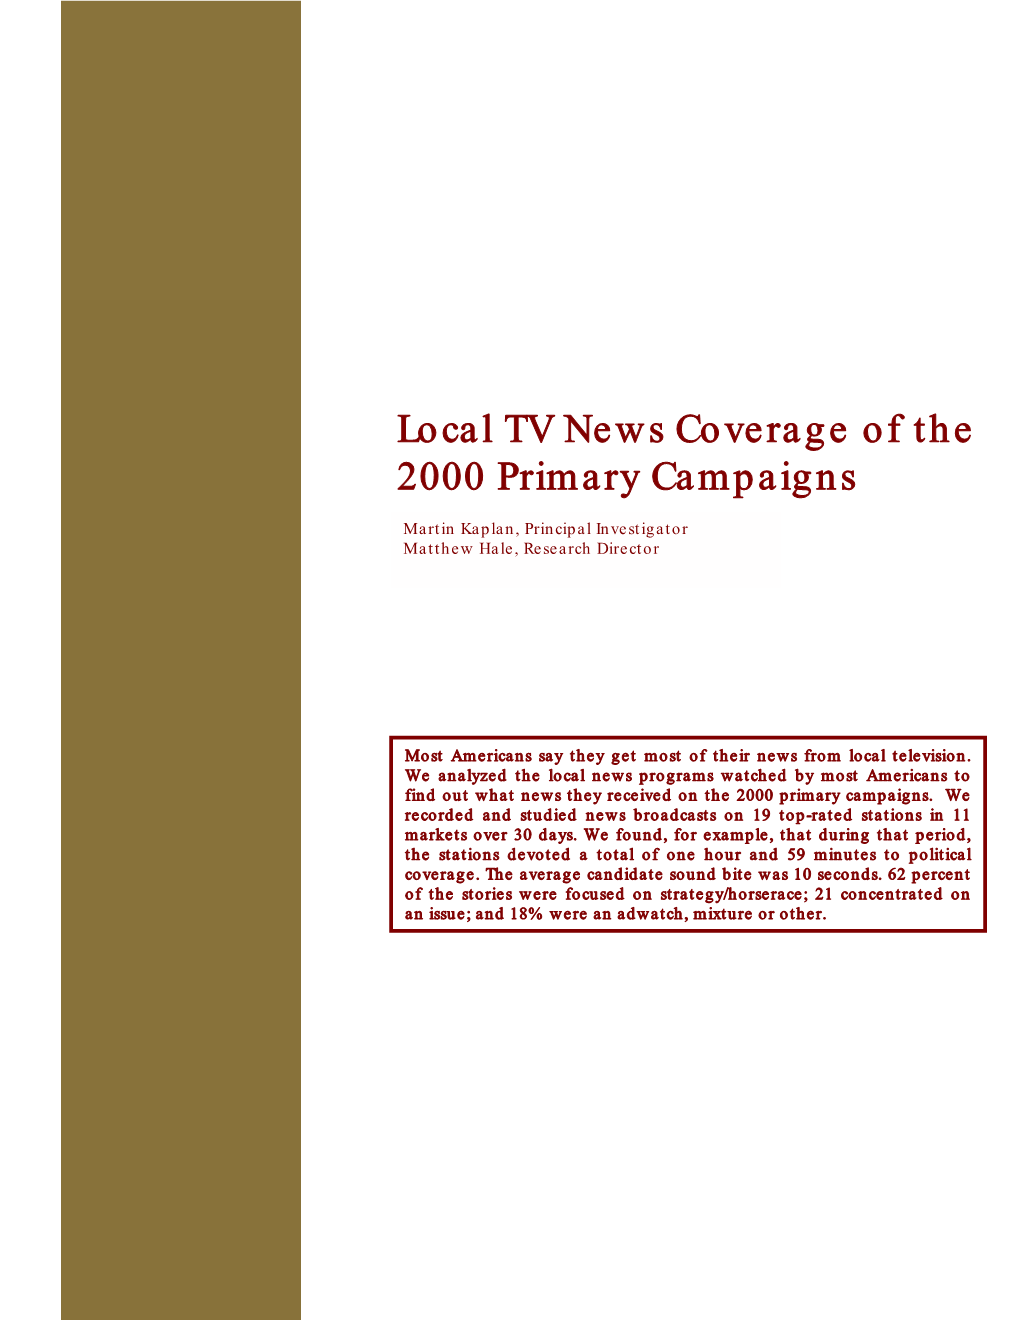 Local Television Coverage of the 2000 Primary Campaign